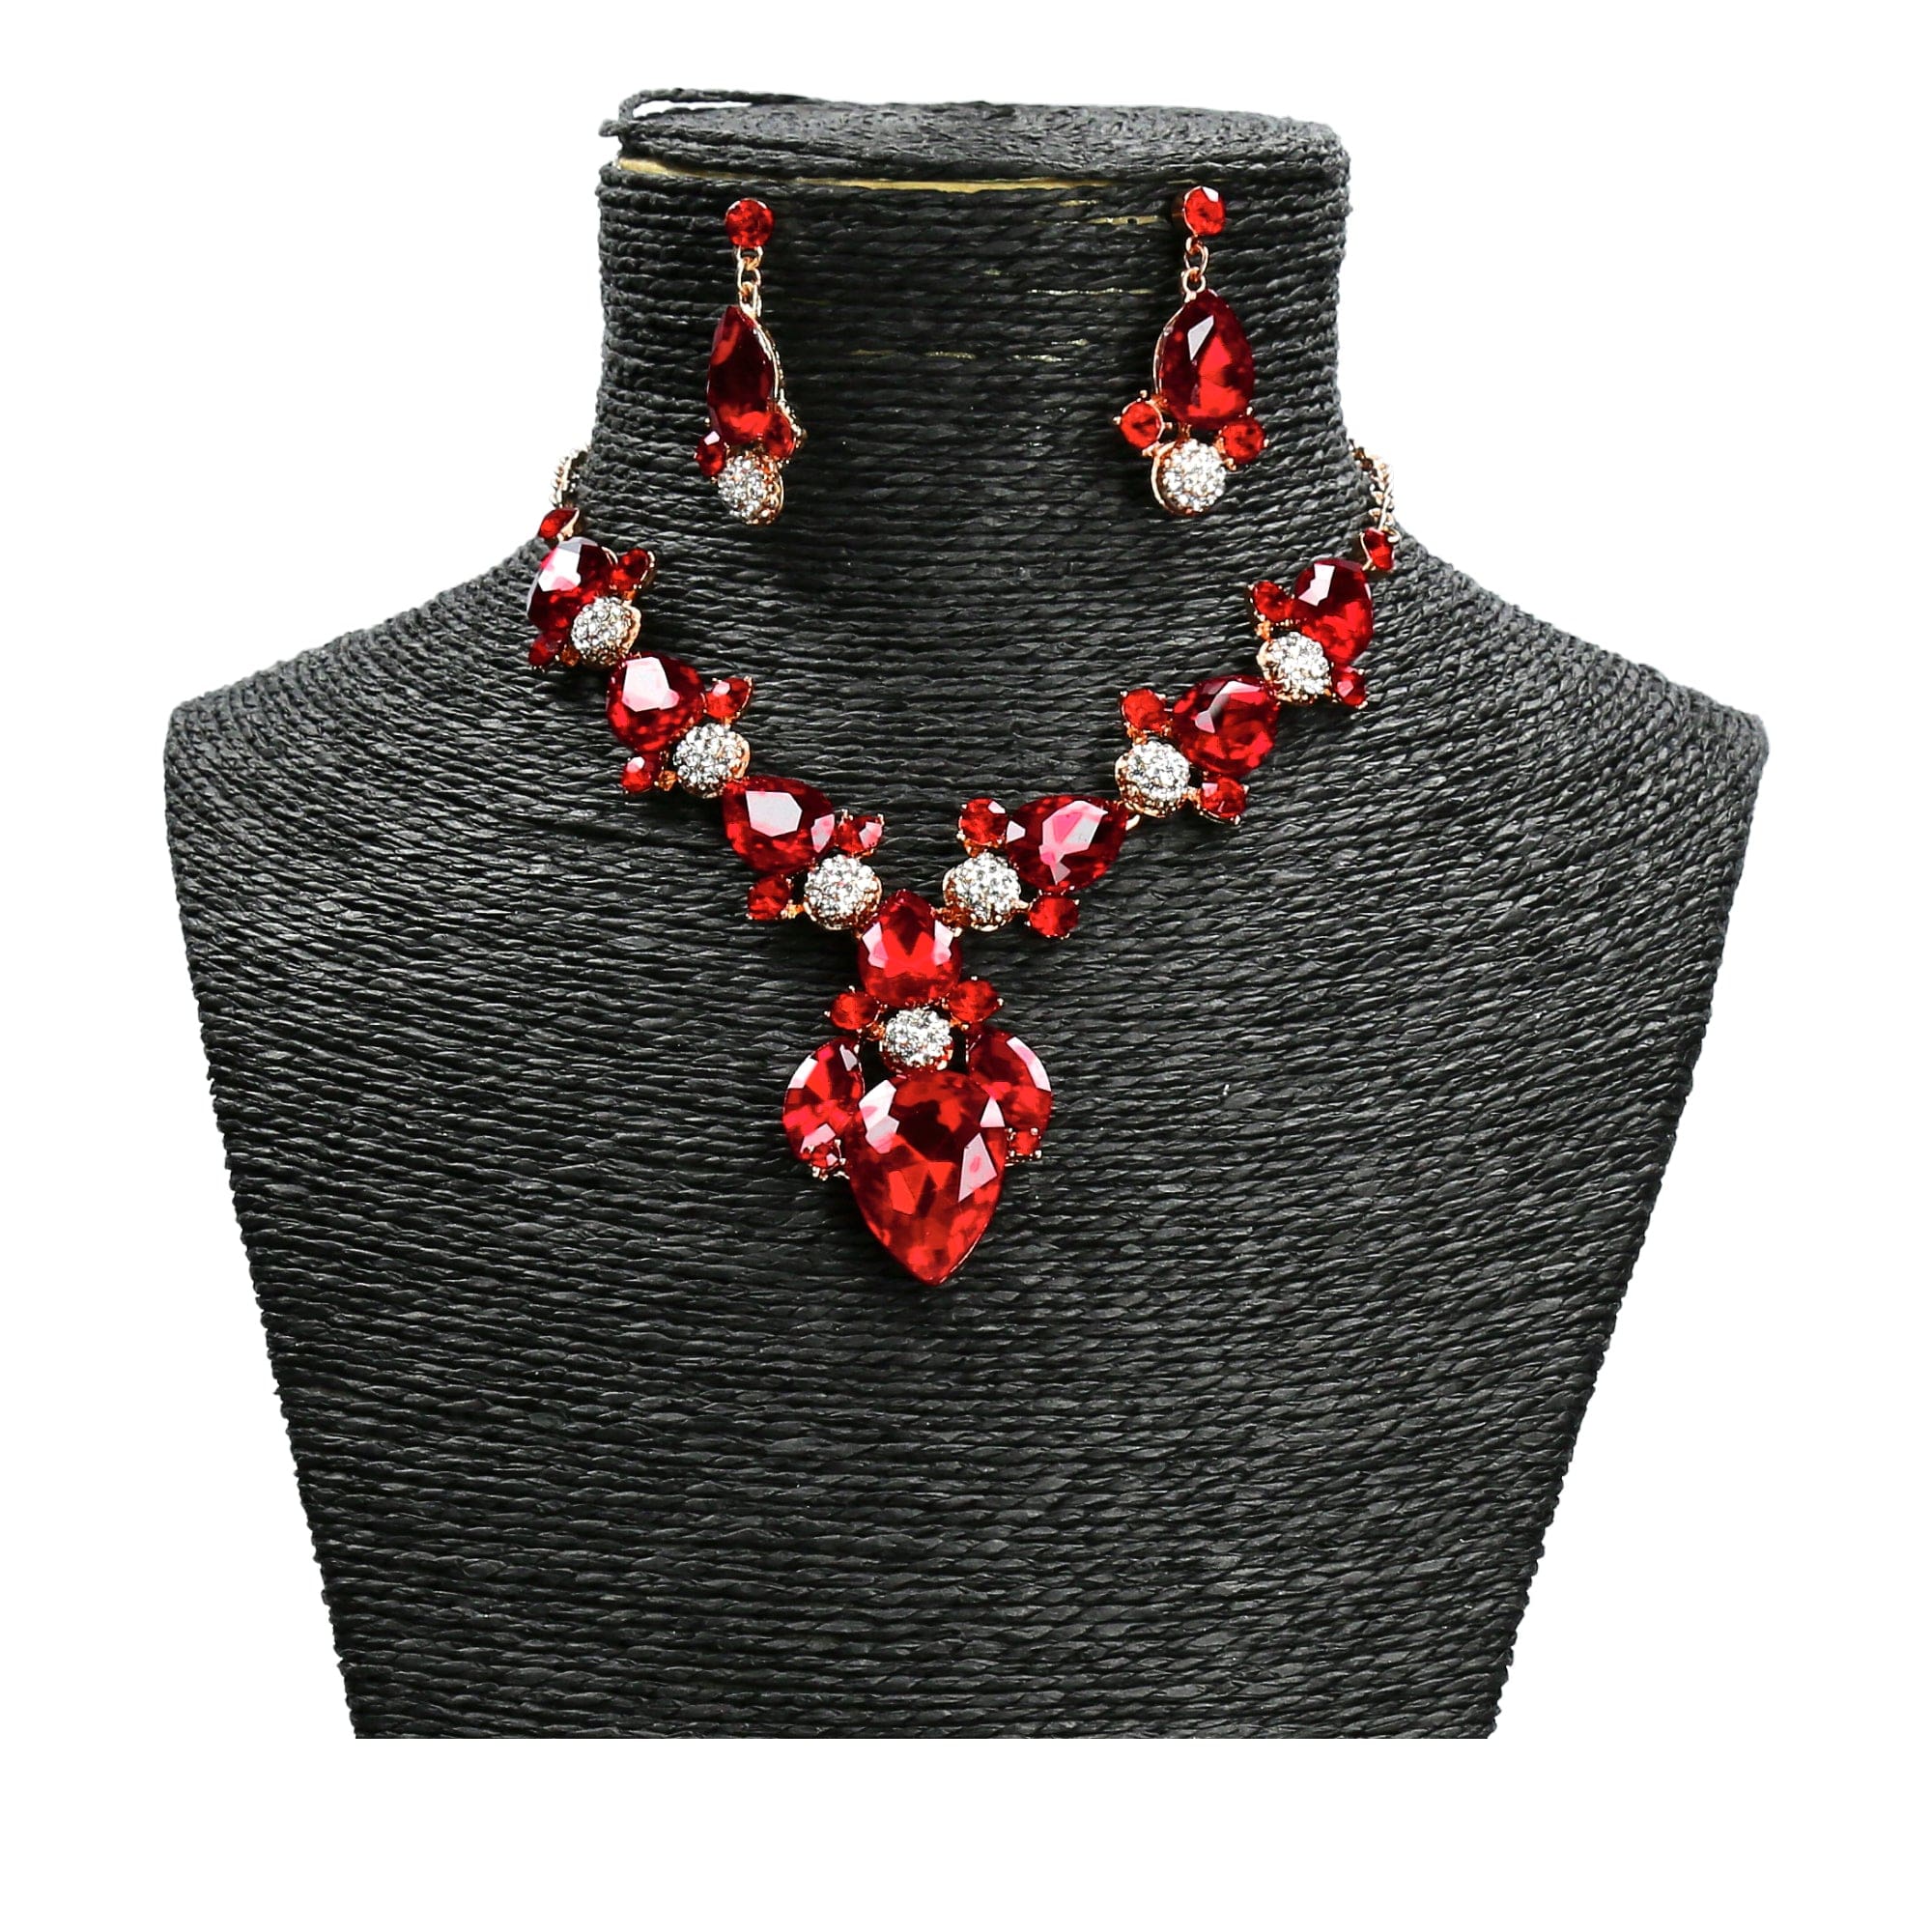 Jewel necklace Philipine - Red - Necklace